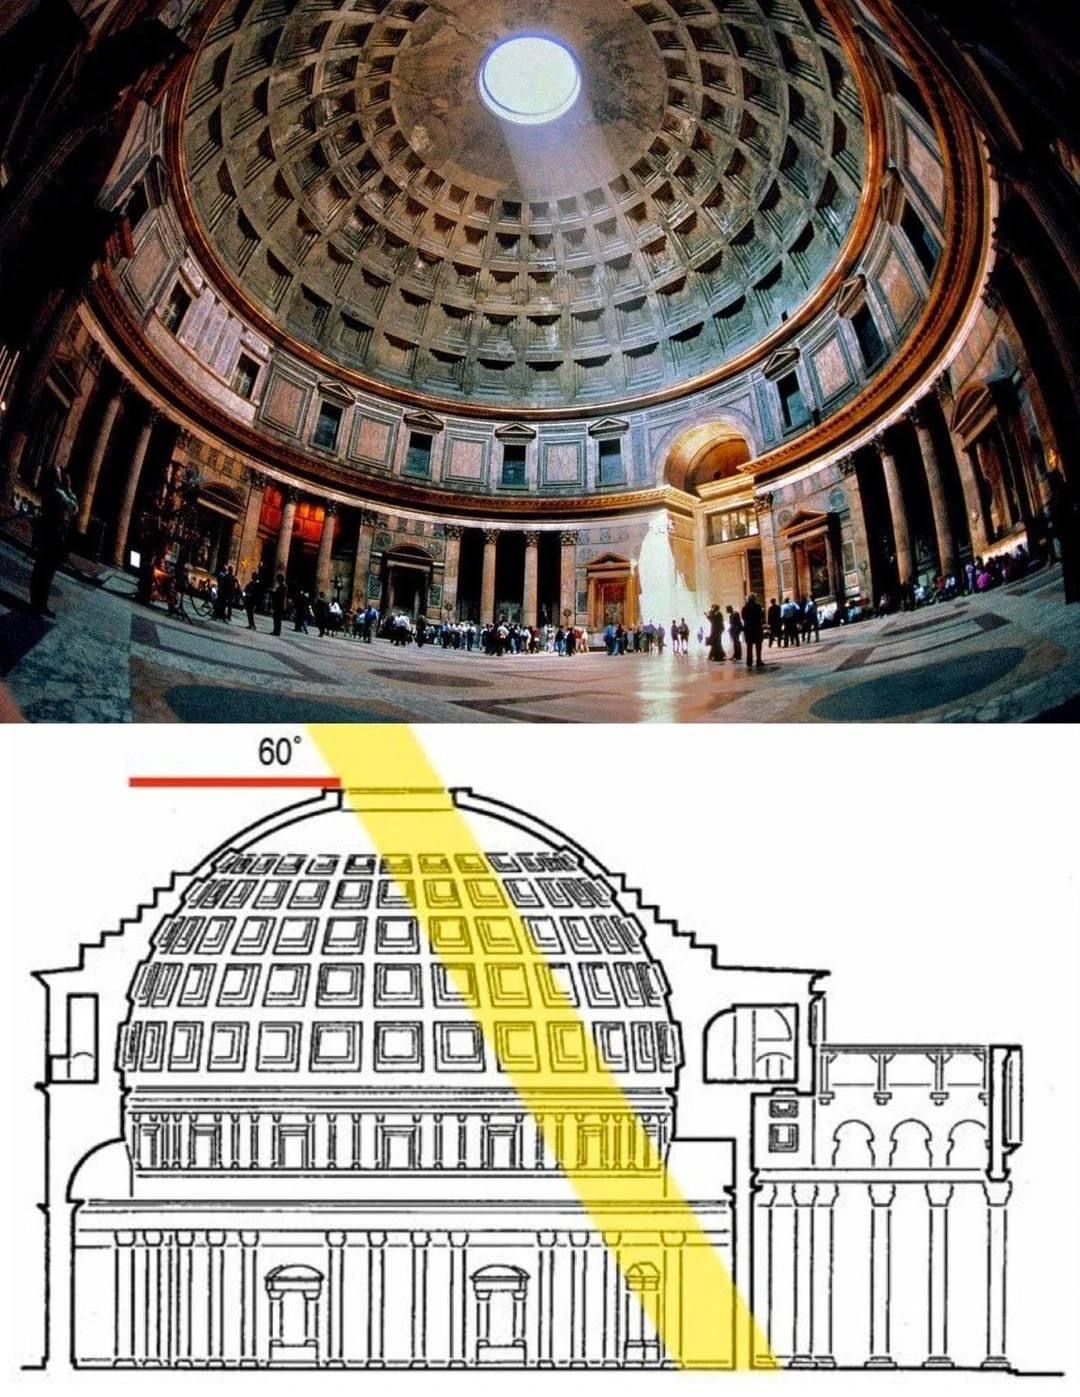 The Pantheon: A Timeless Marvel of Ancient Engineering